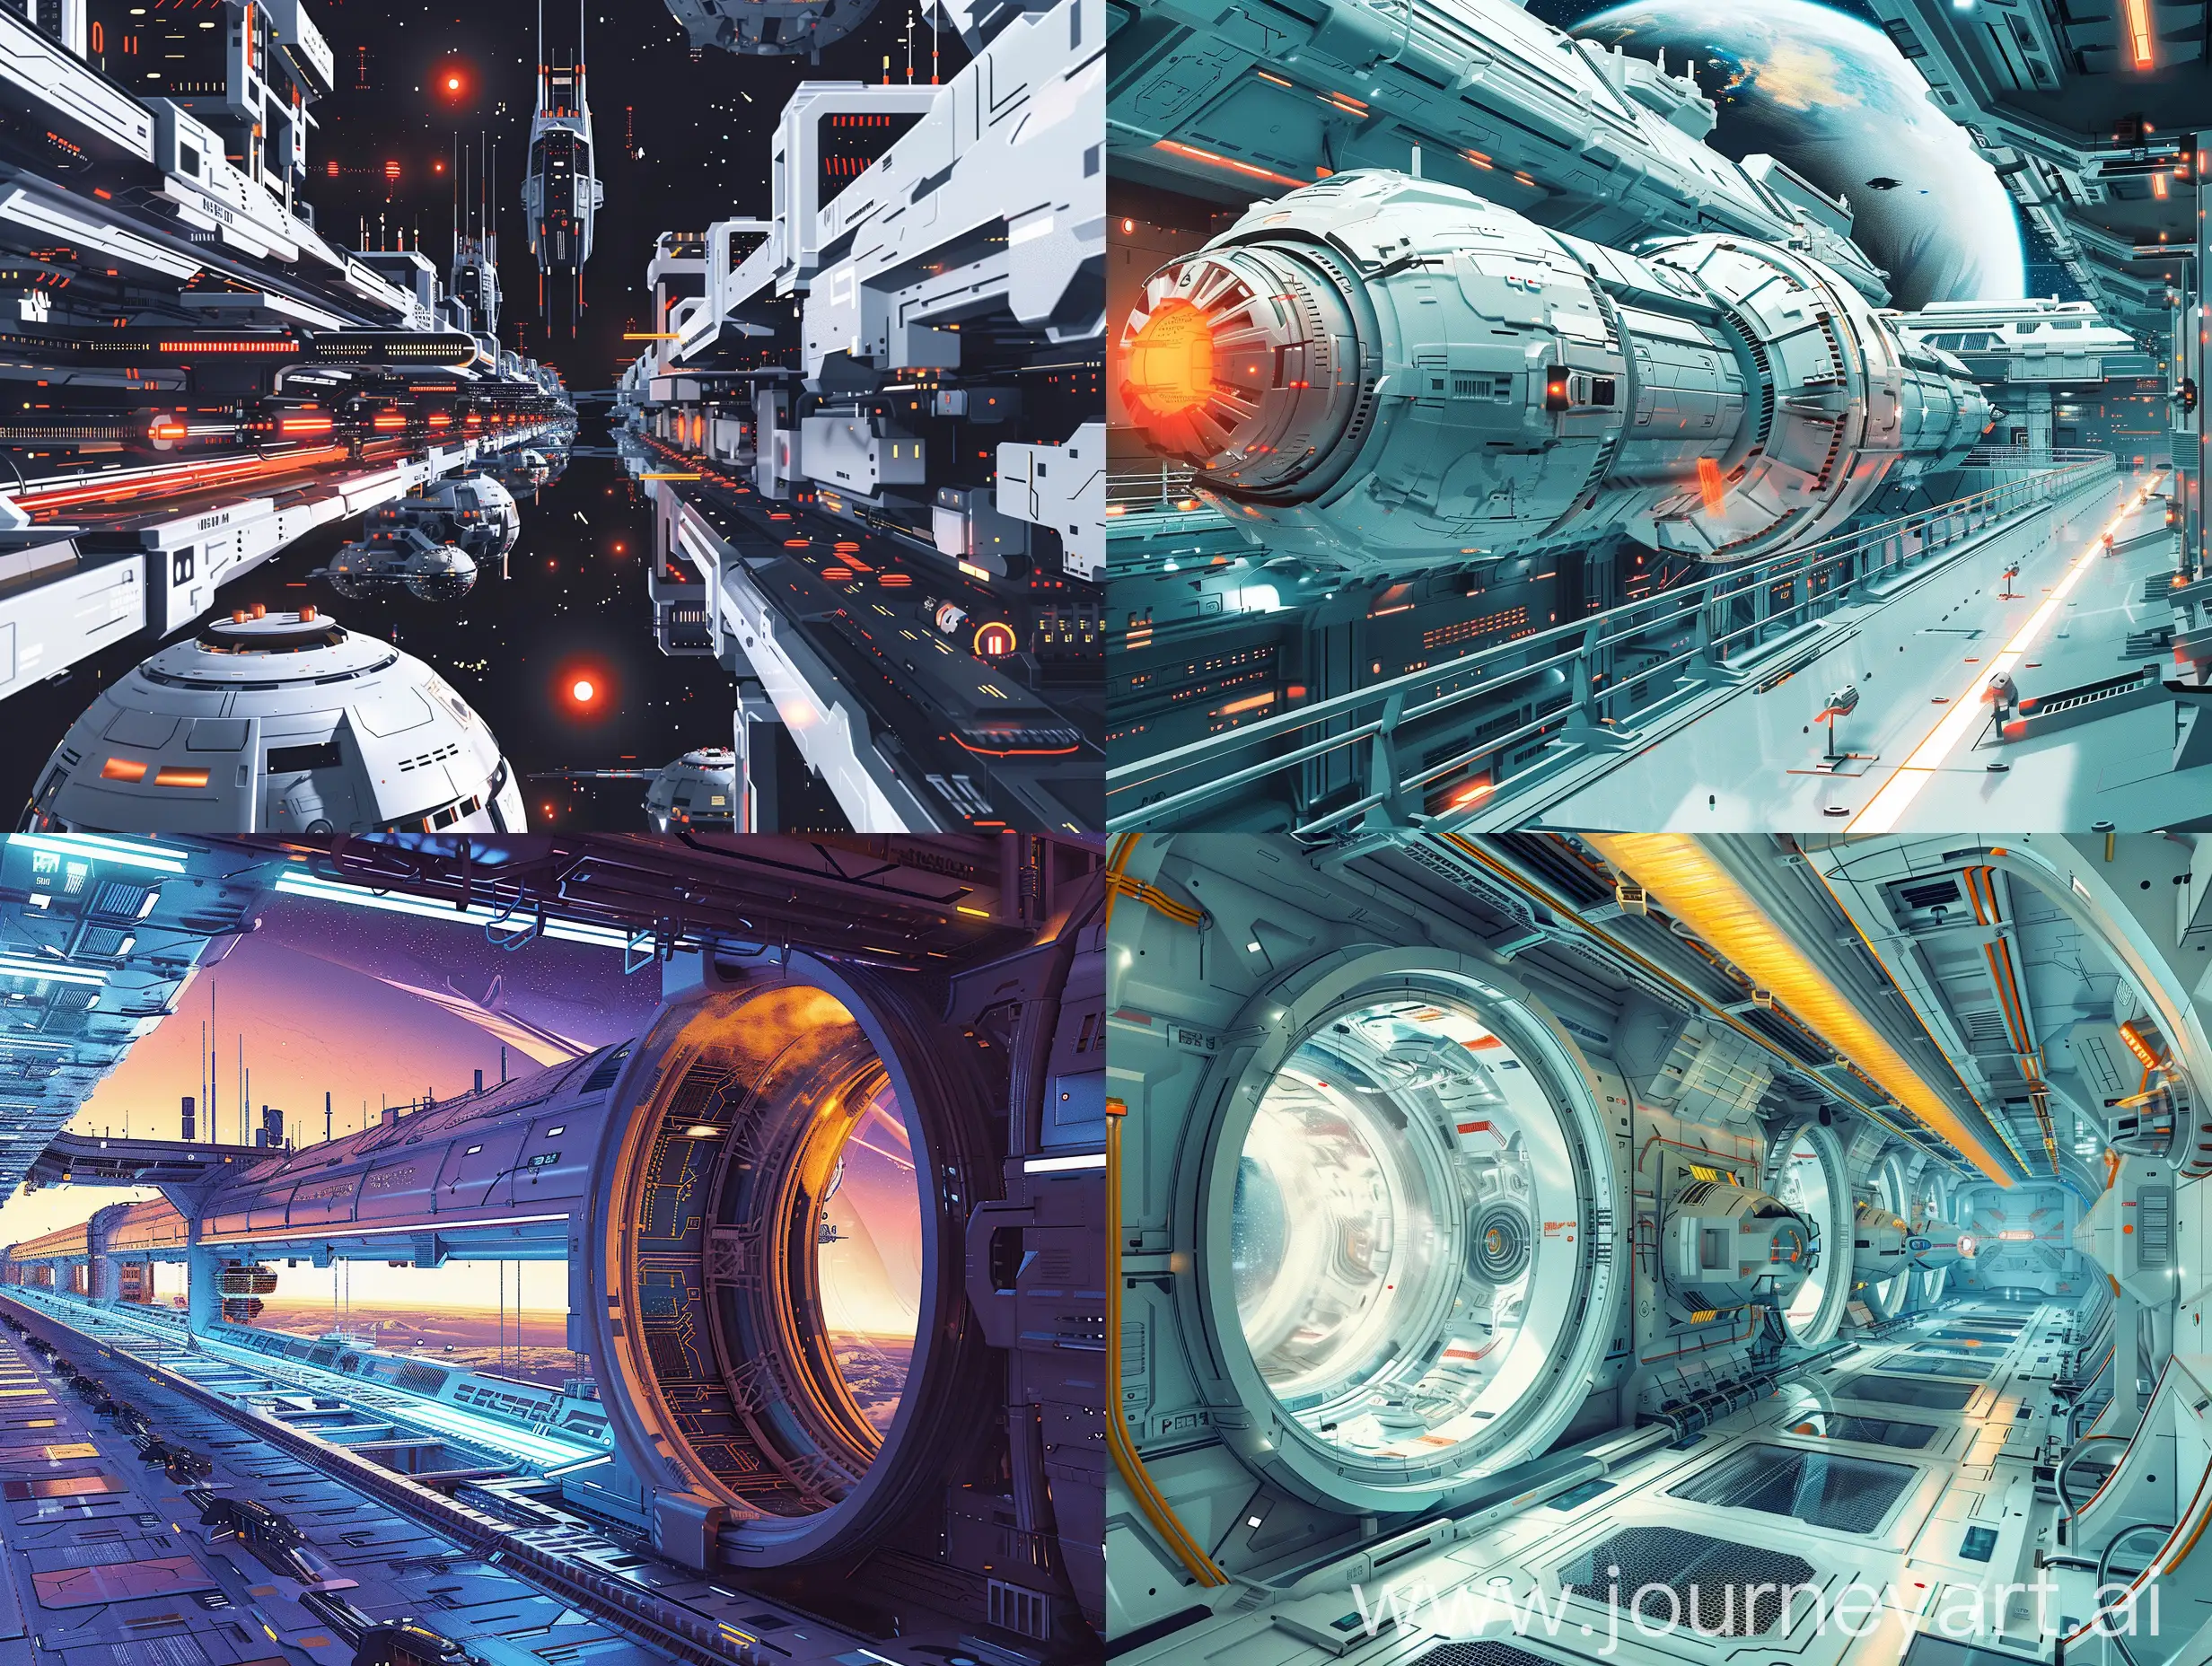 A series of vector illustrations of a futuristic space station, sleek and shiny surfaces, advanced technology and spaceships, bright and sci-fi atmosphere, vector art, created with Adobe Illustrator and 3D tools